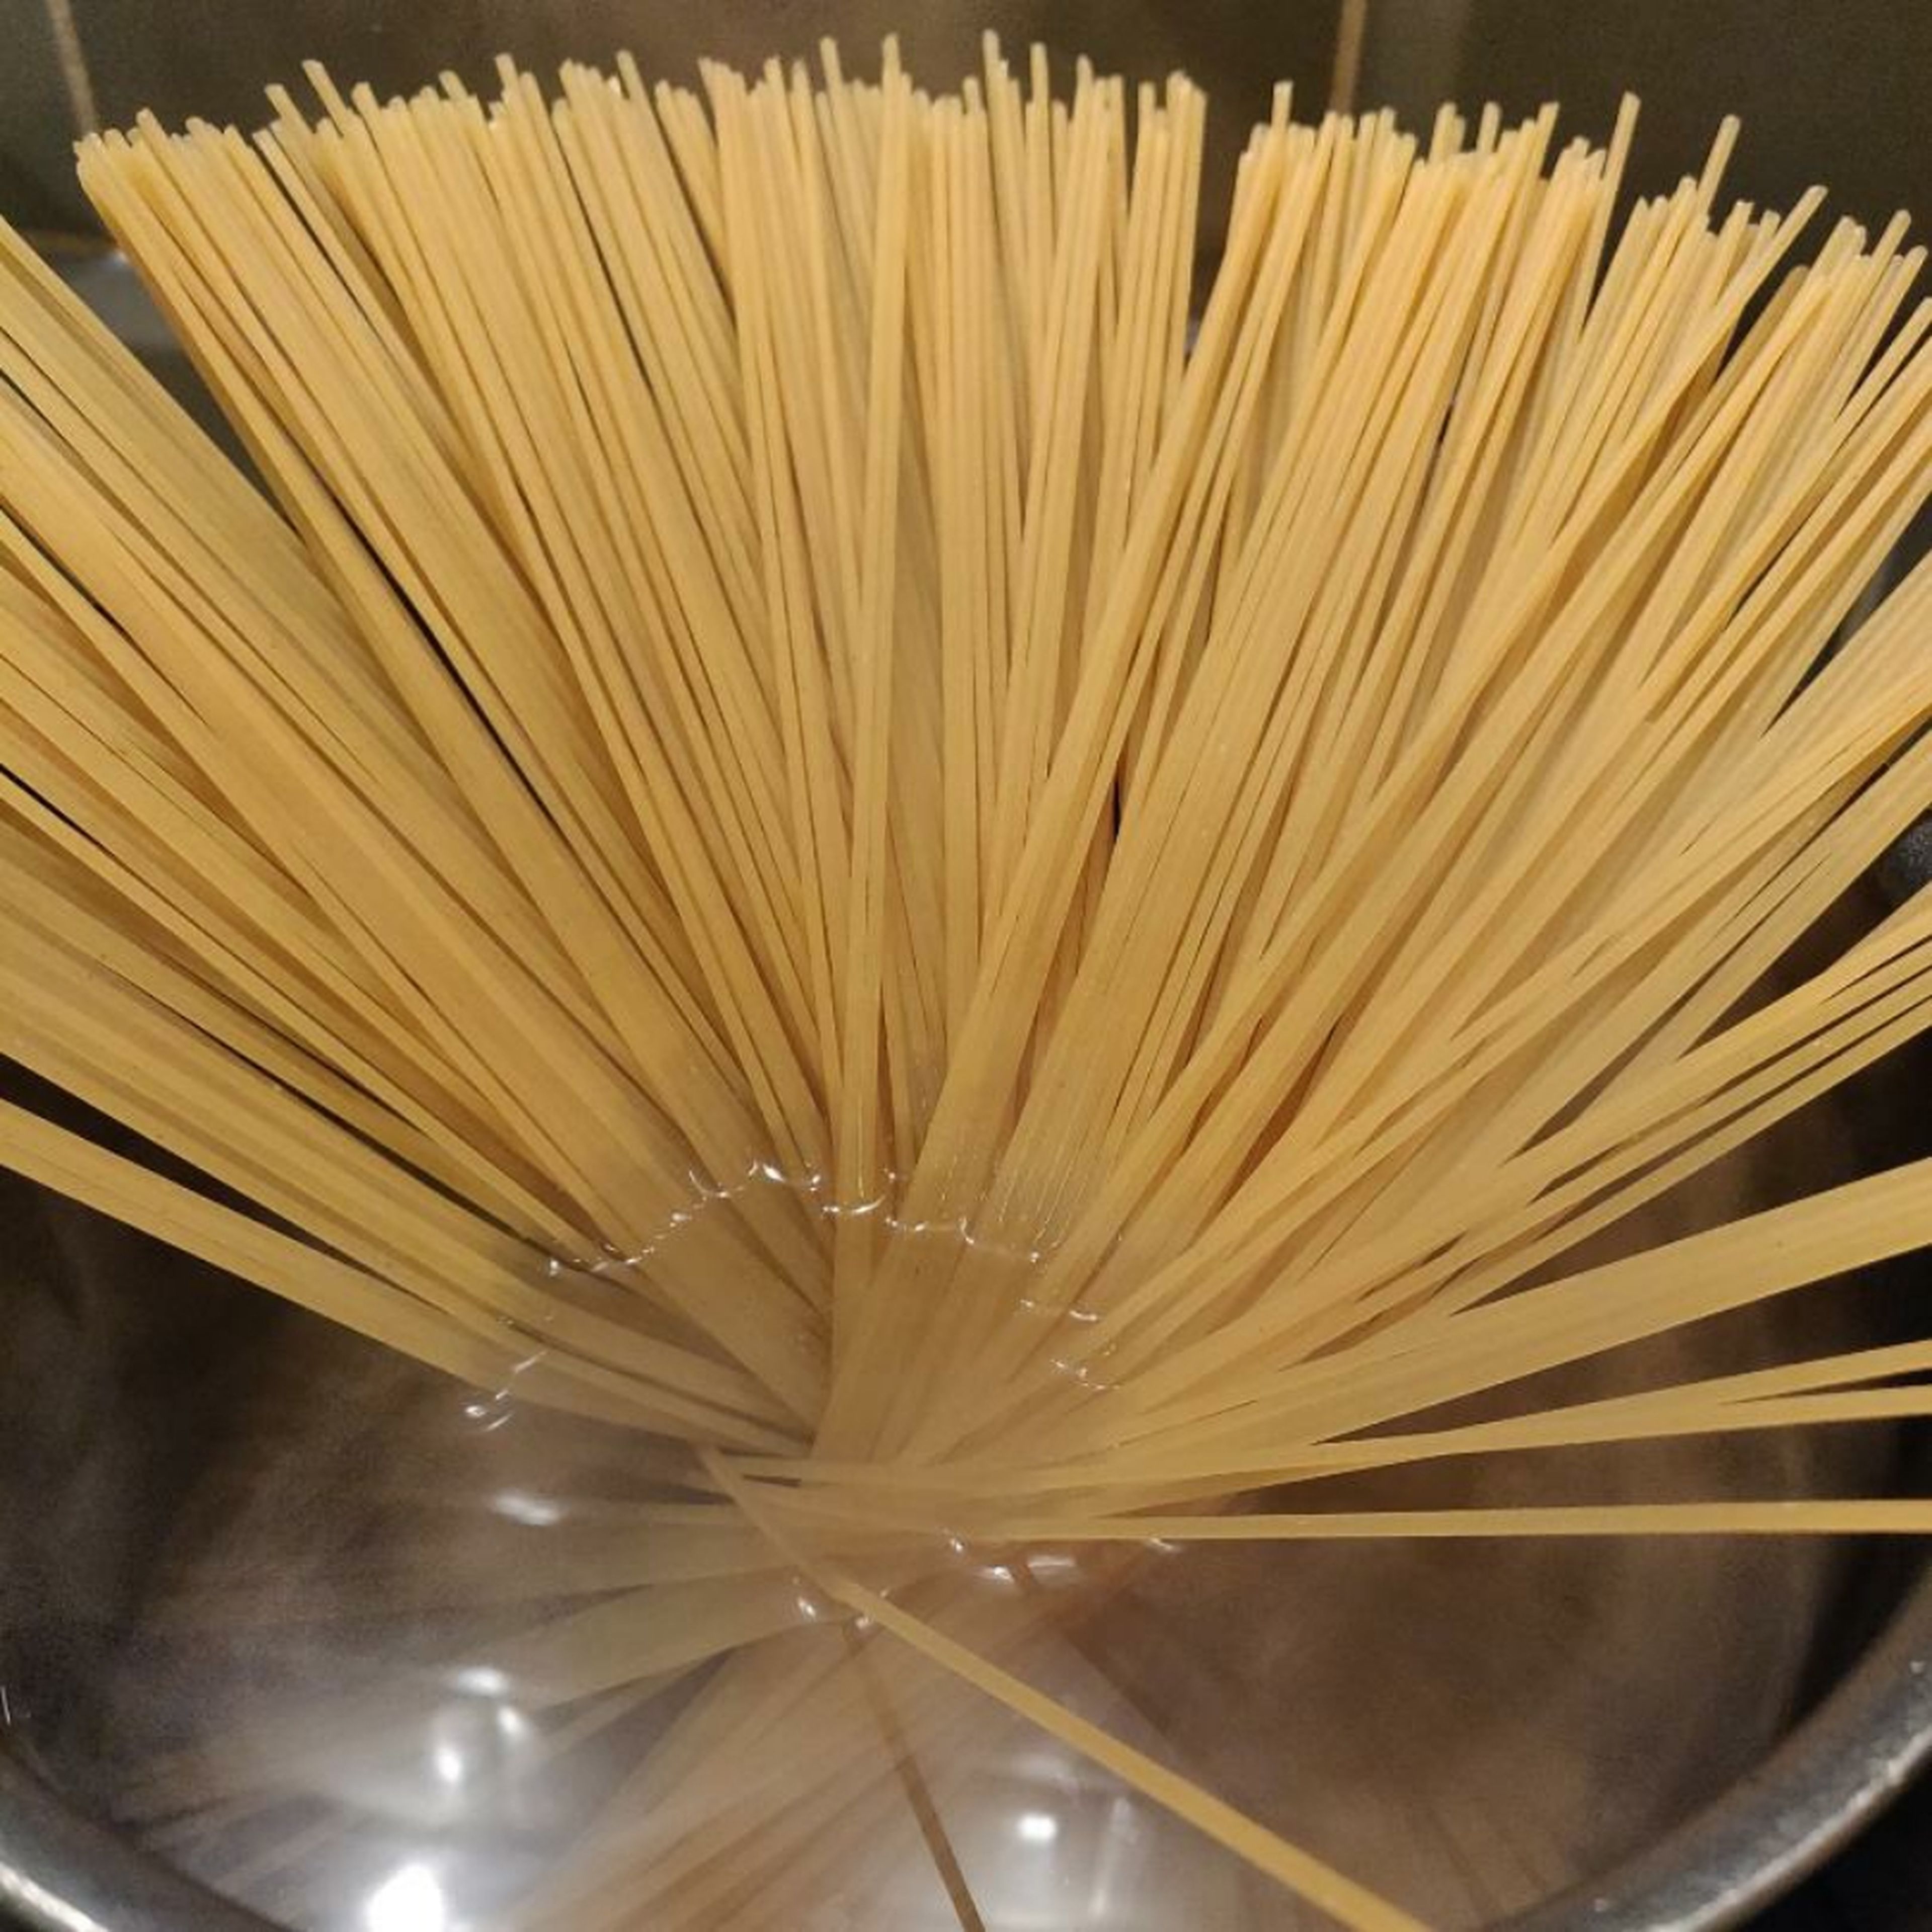 In a pot, boil a good amount of water + generous amount of salt and cook your spaghetti until al dente.